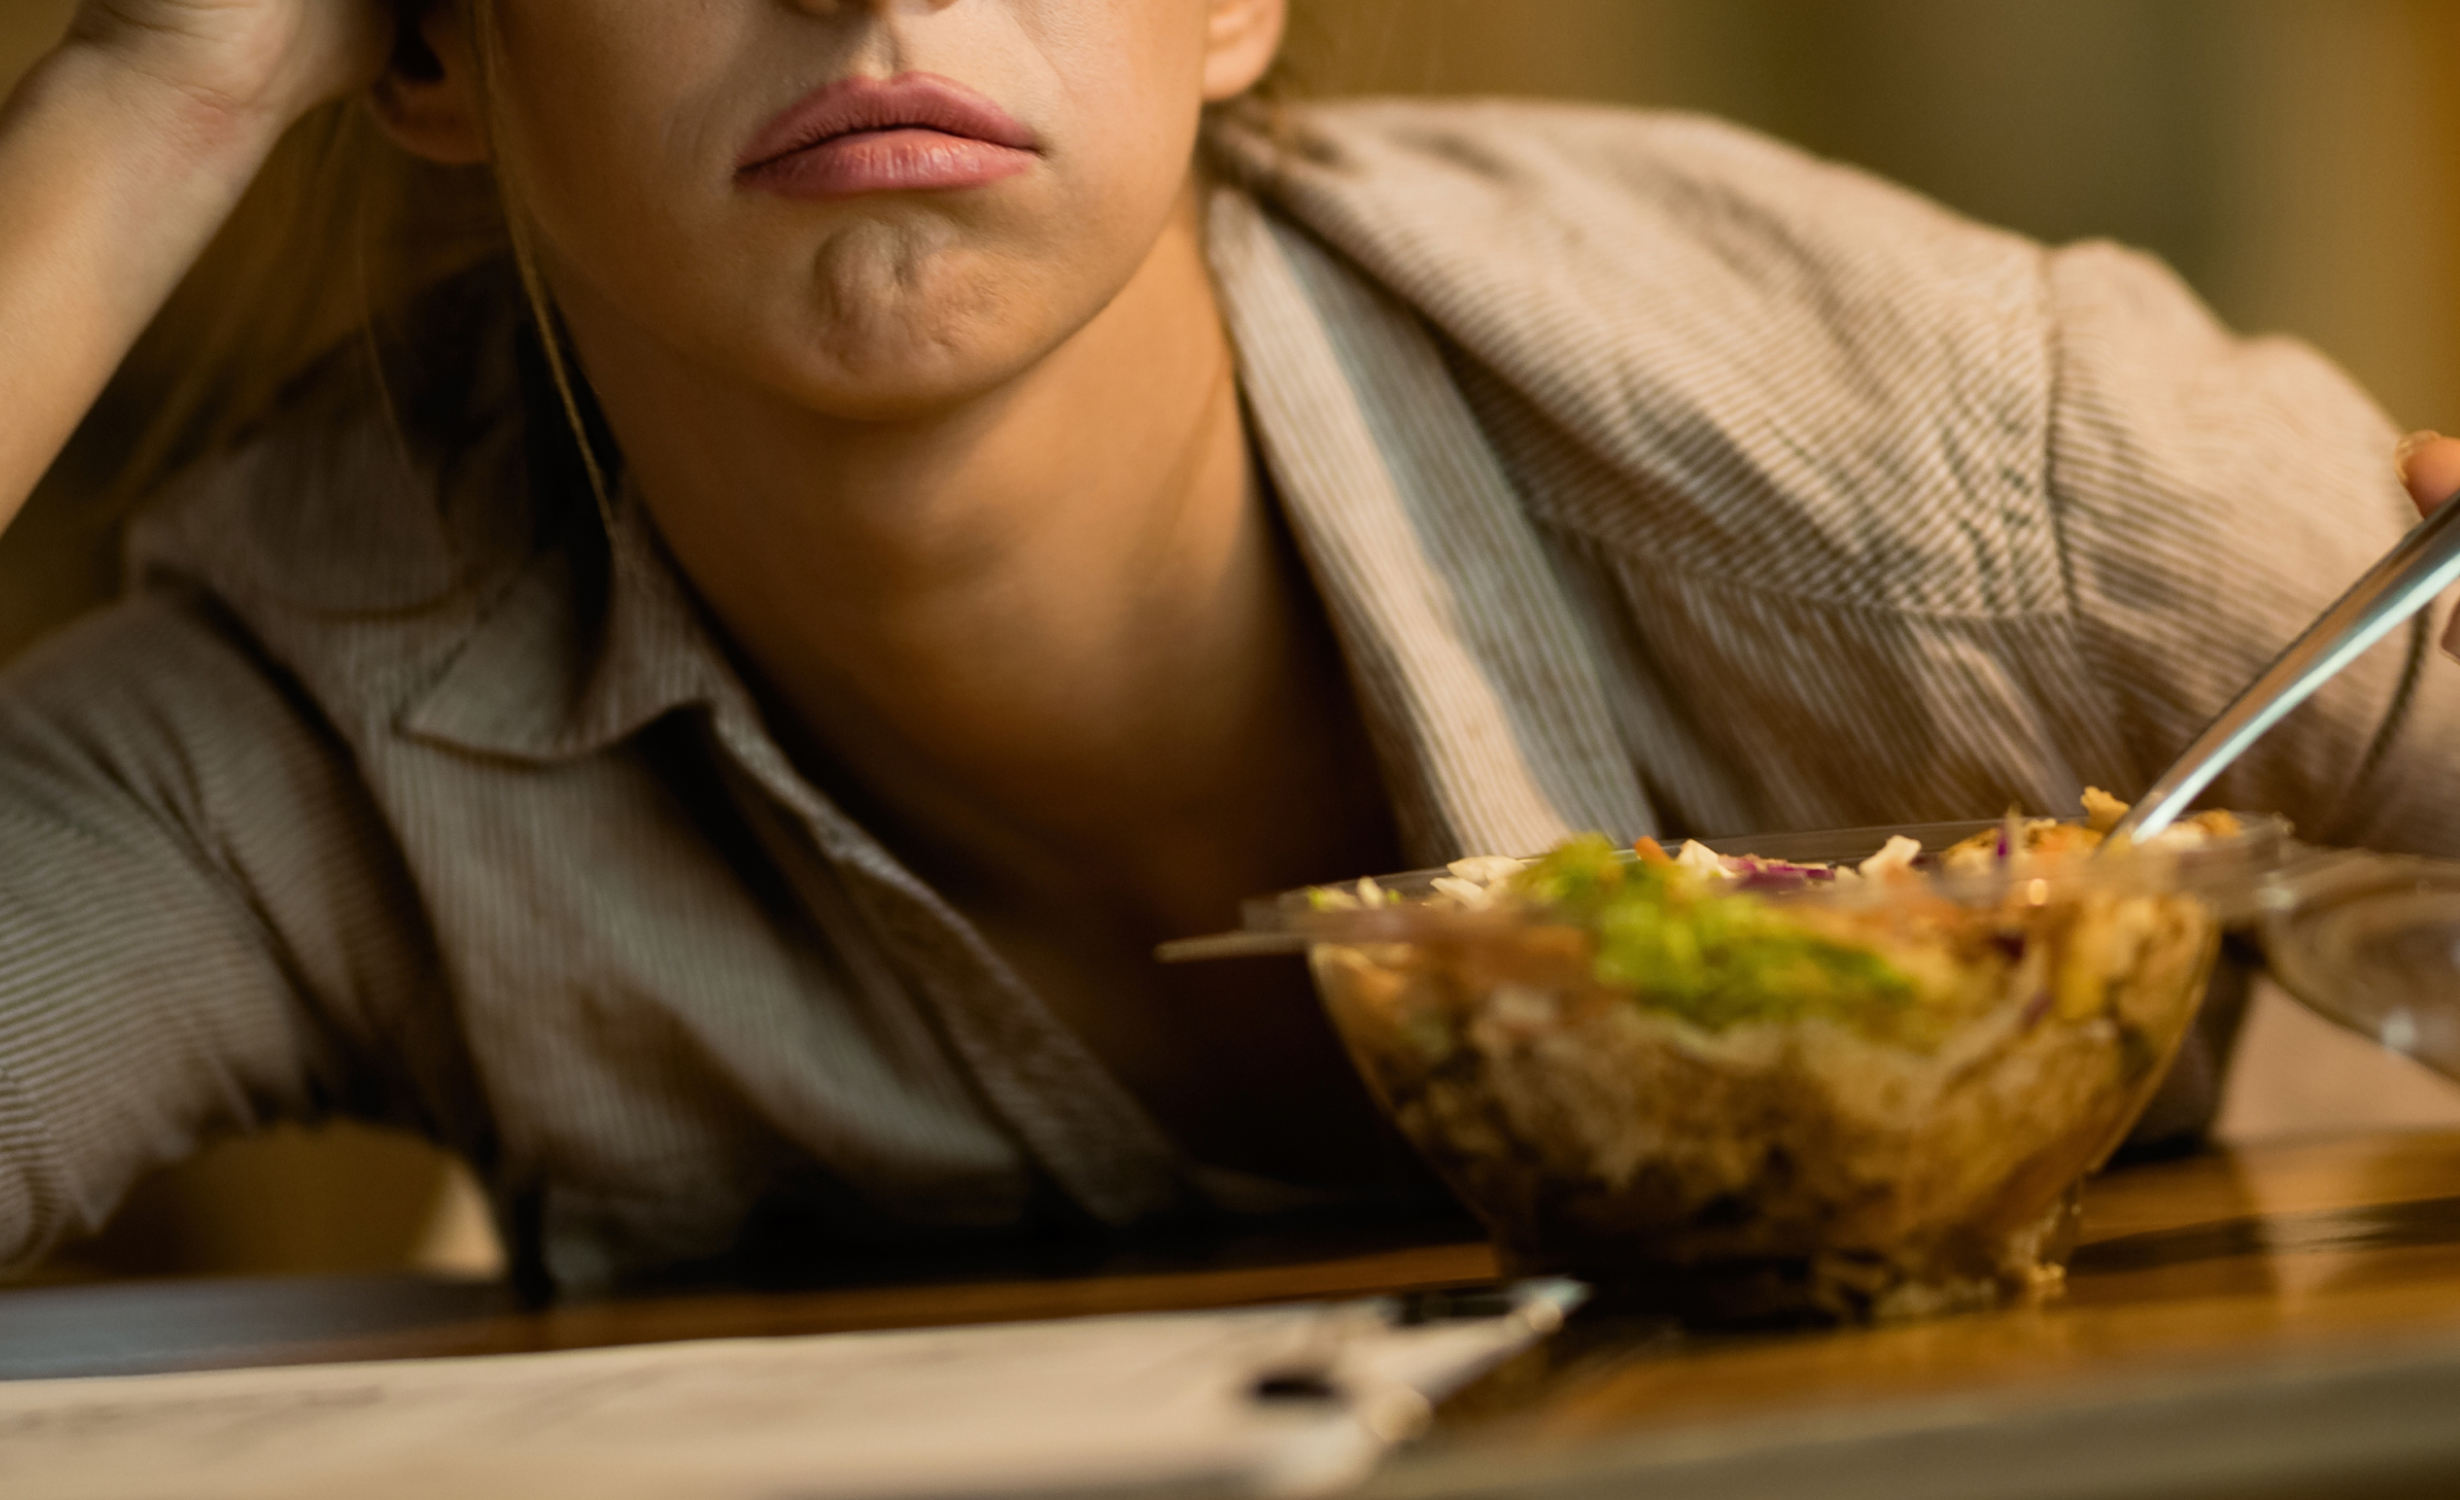 A close-up of a person leaning over a table with a concerned expression, with a salad bowl in front, indicating issues related to rapid weight loss.